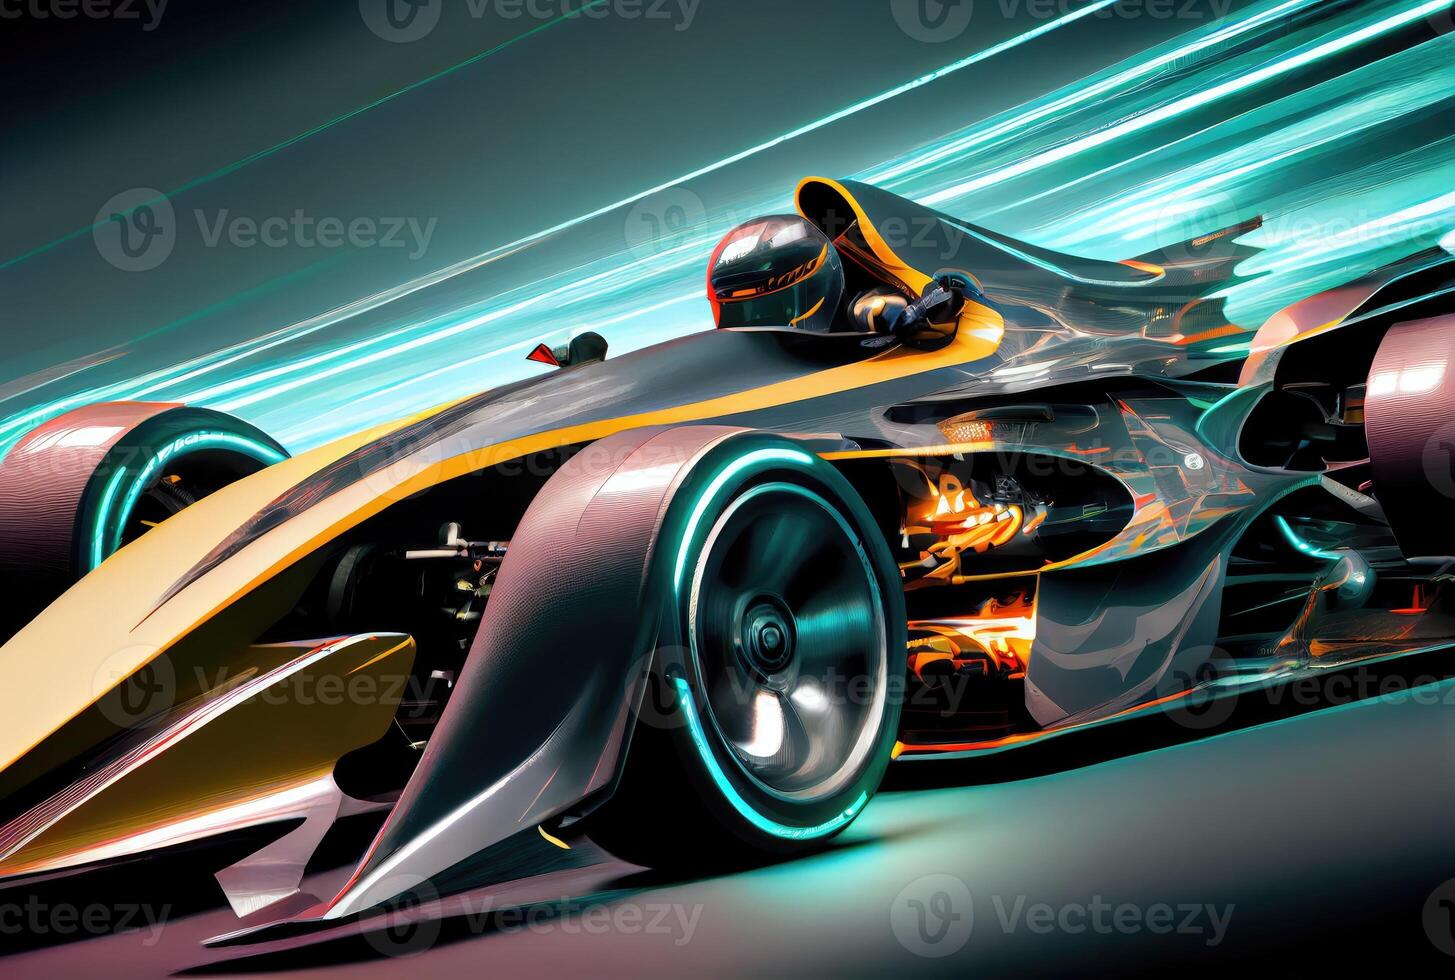 Grand prix racing car in the fast track background. Hobbies leisure and Sport tournament concept. photo